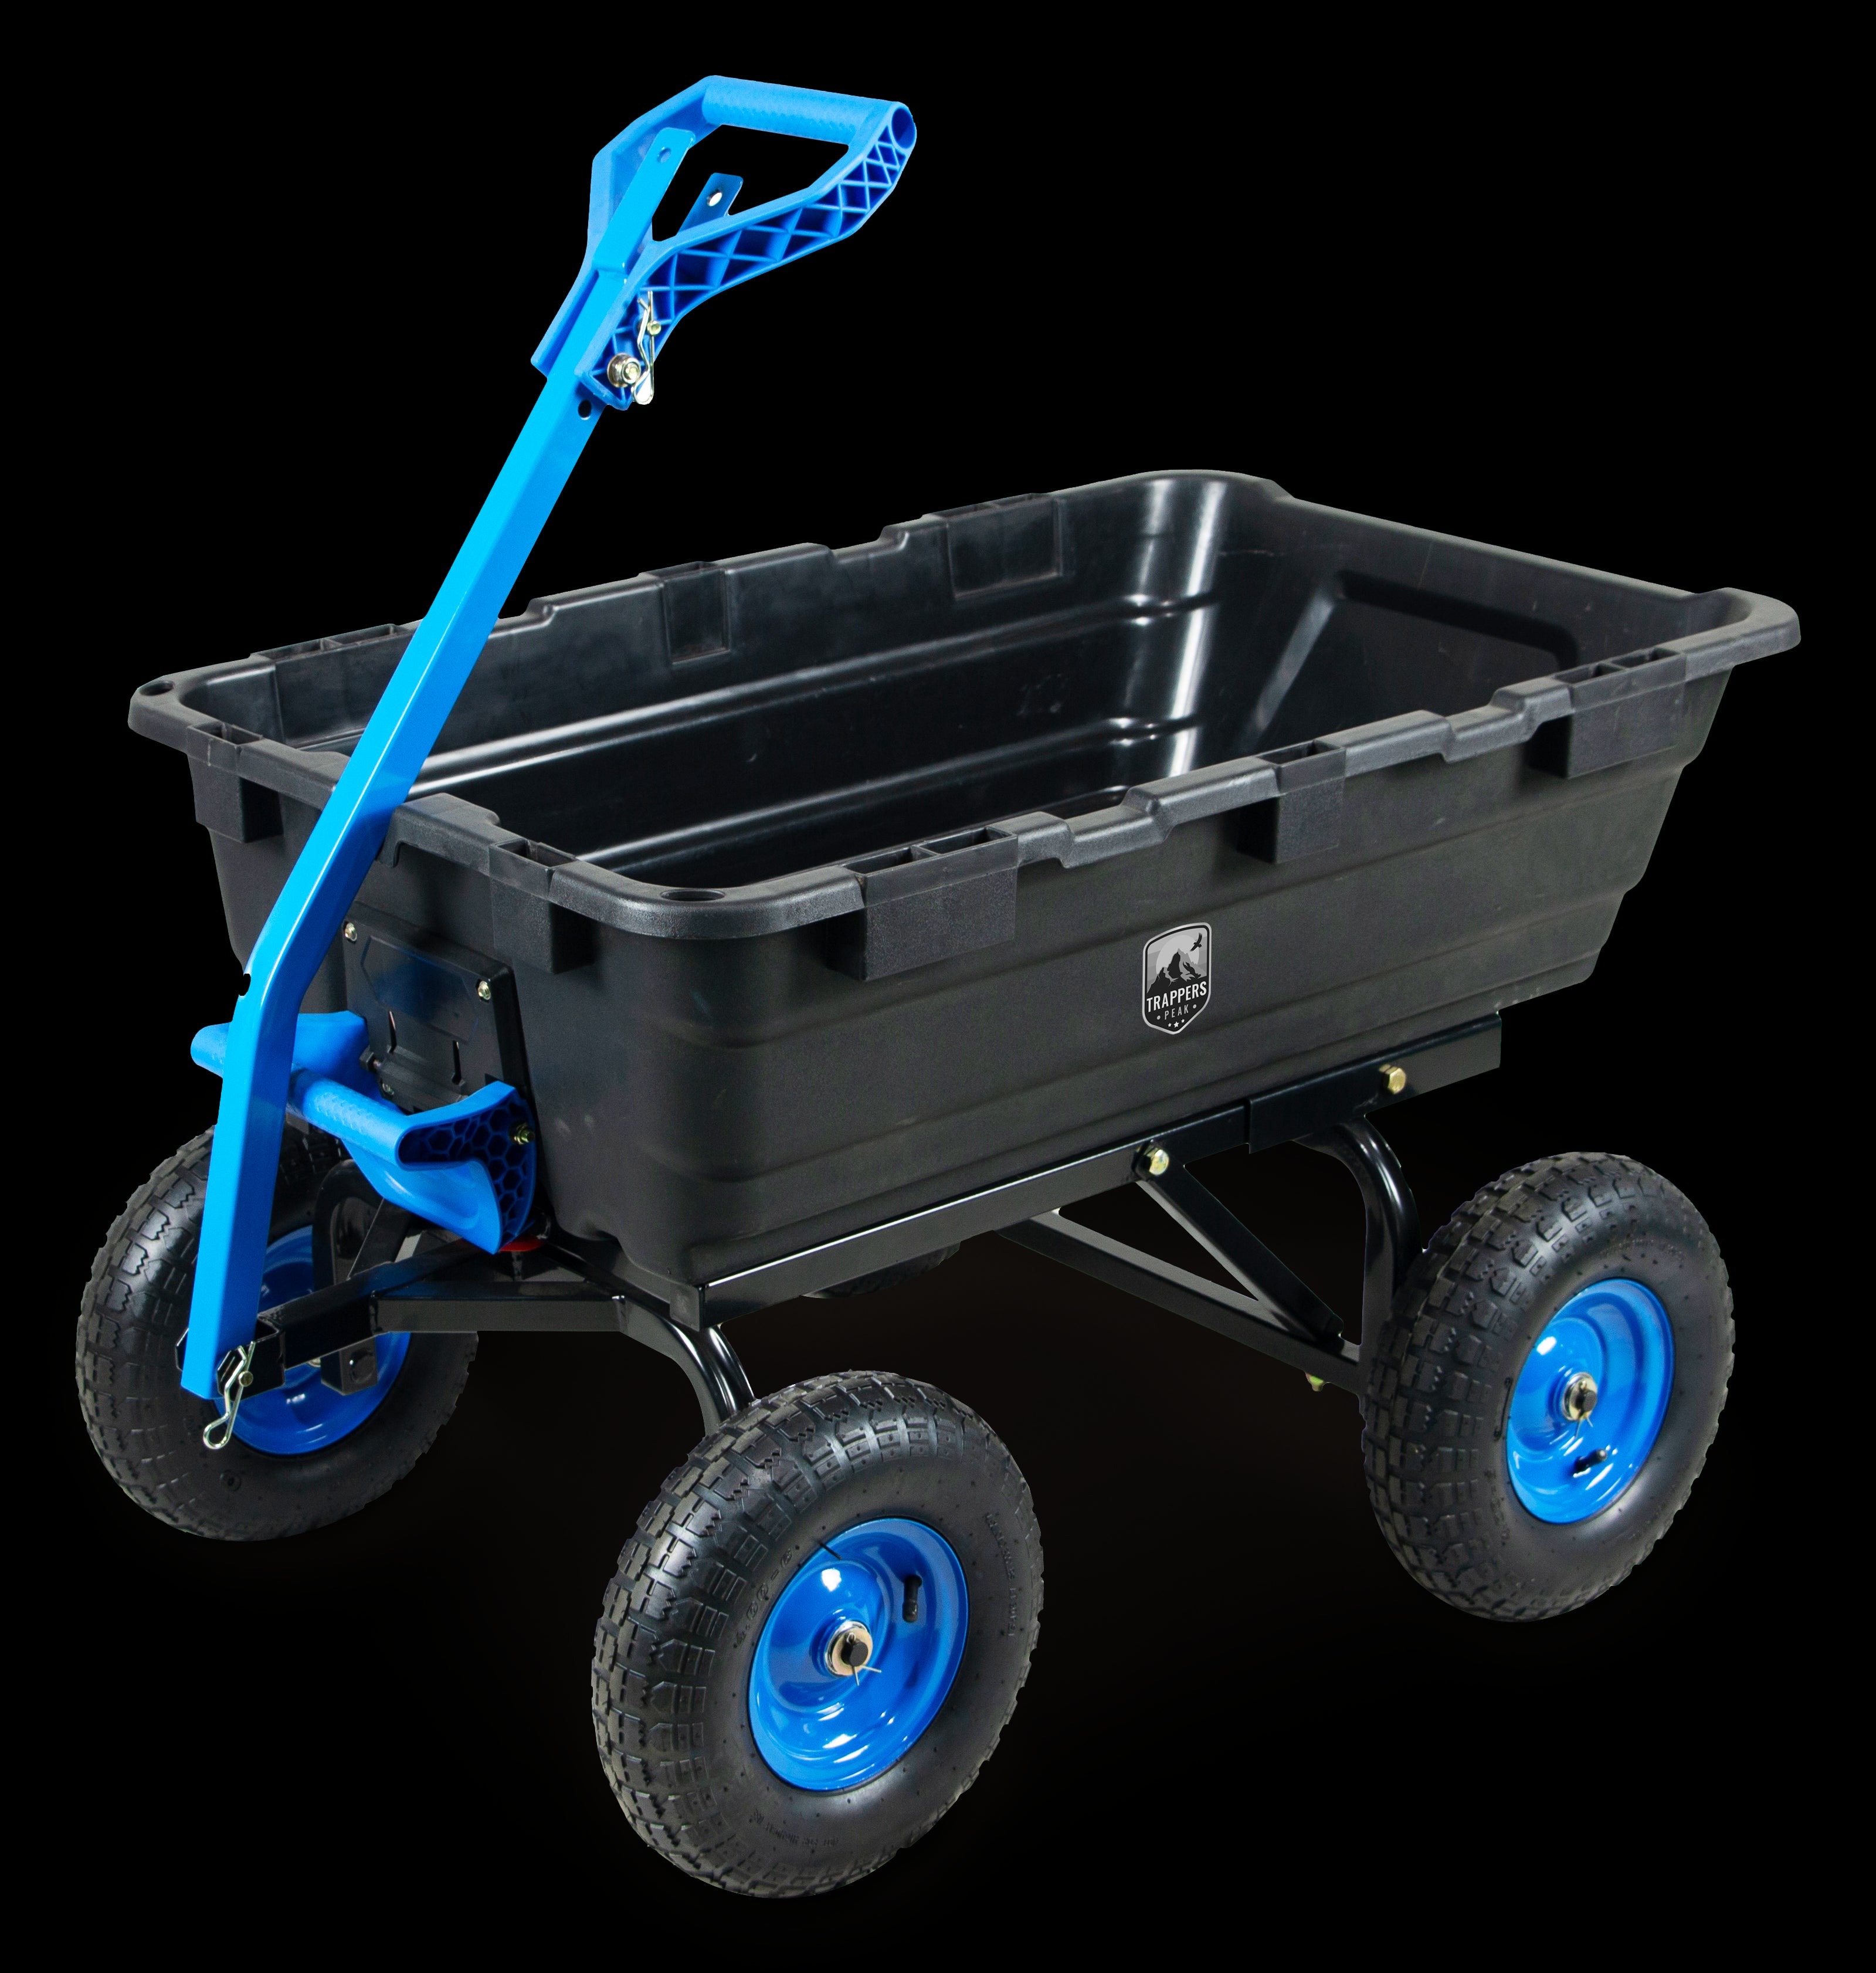 Trappers Peak Heavy Duty Cart, Extra Large, 7 Cubic Feet, 13" Air Filled Wheels, and 42" x 23" Bed Size